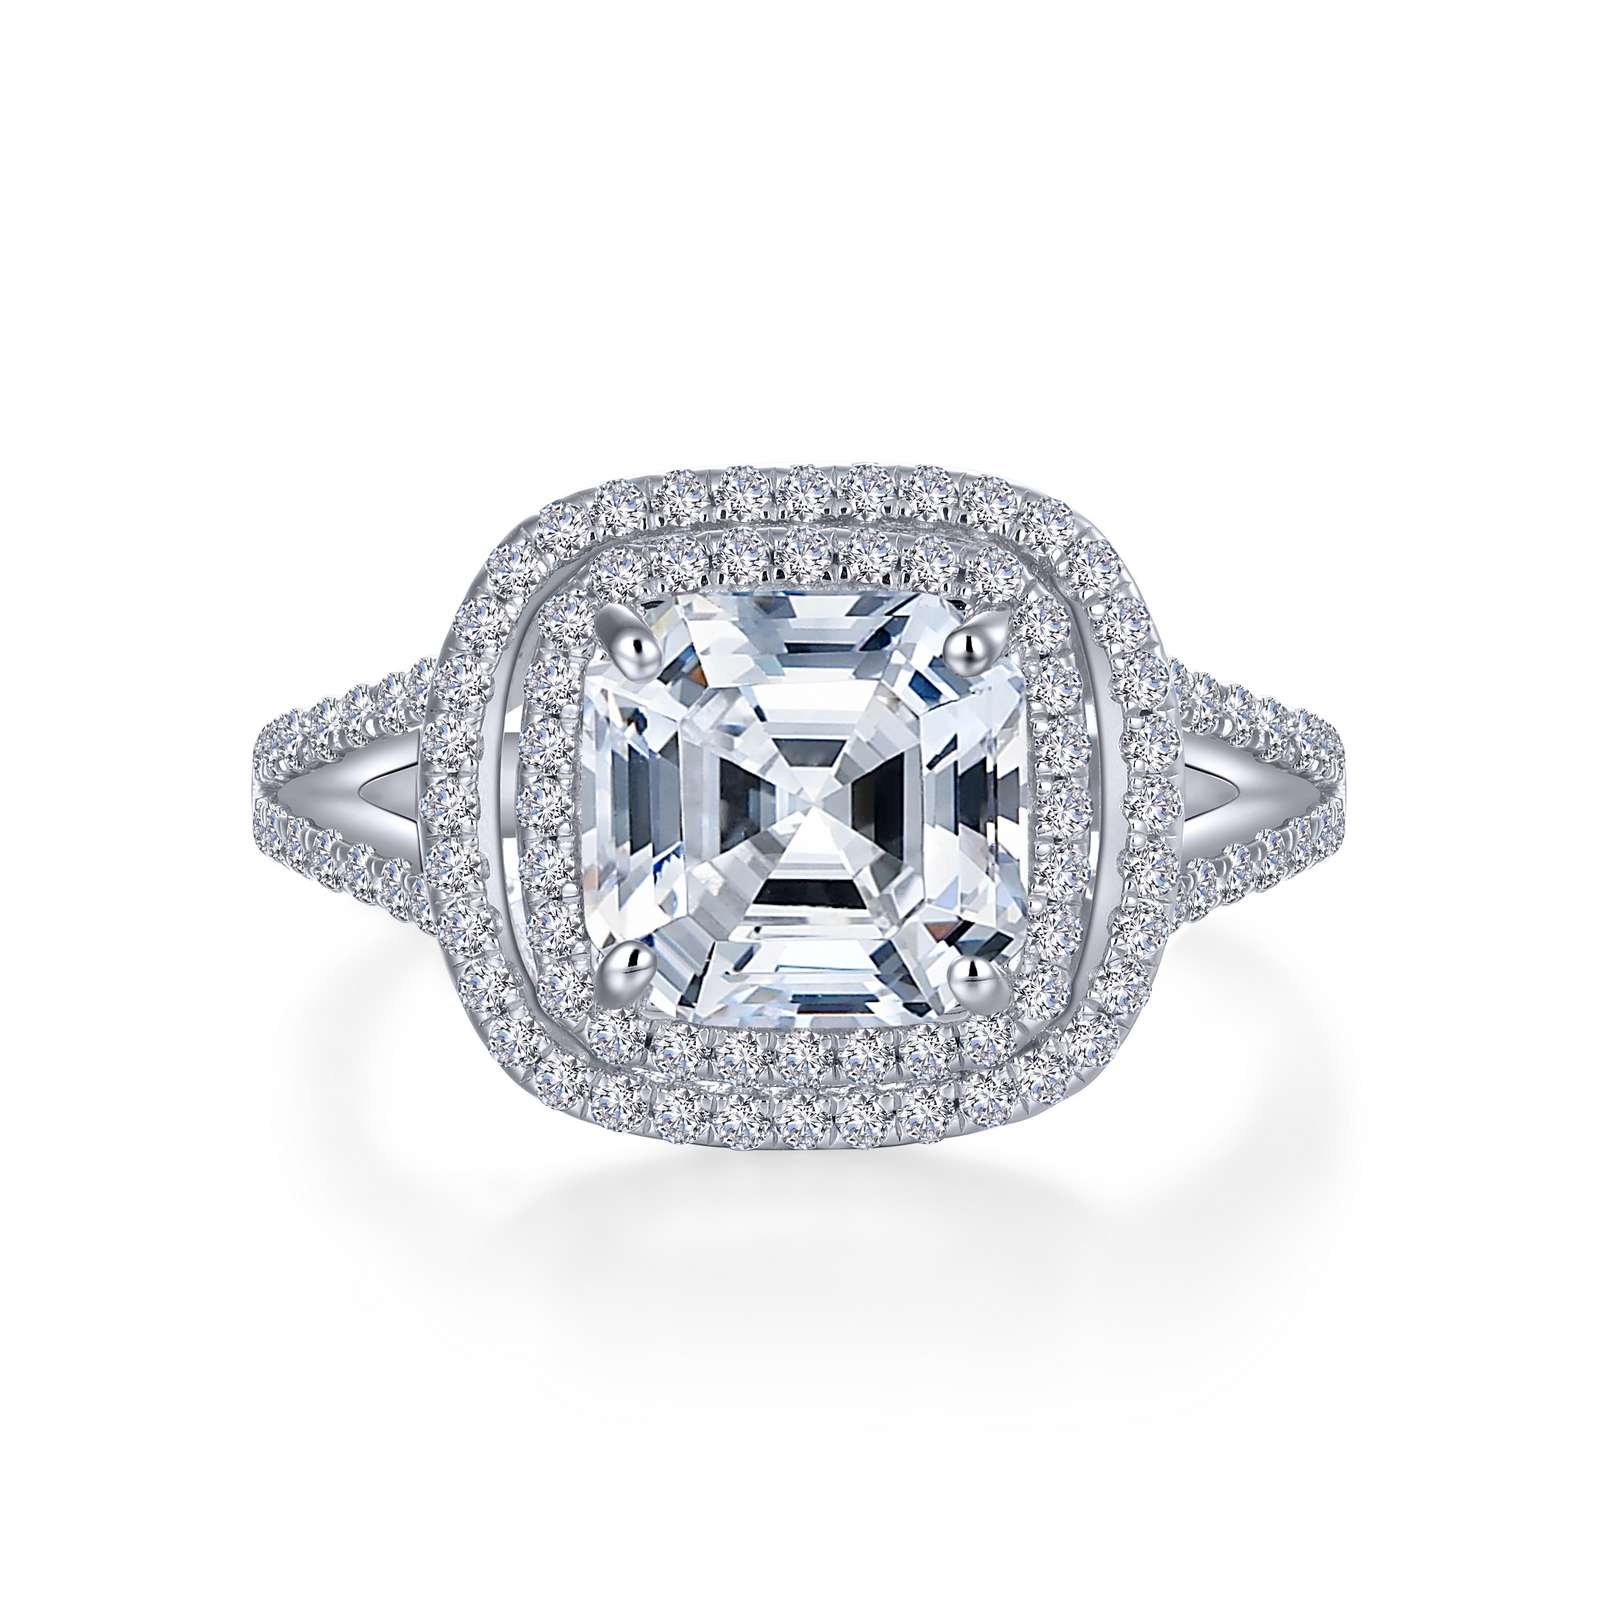 Stunning Engagement Ring Griner Jewelry Co. Moultrie, GA